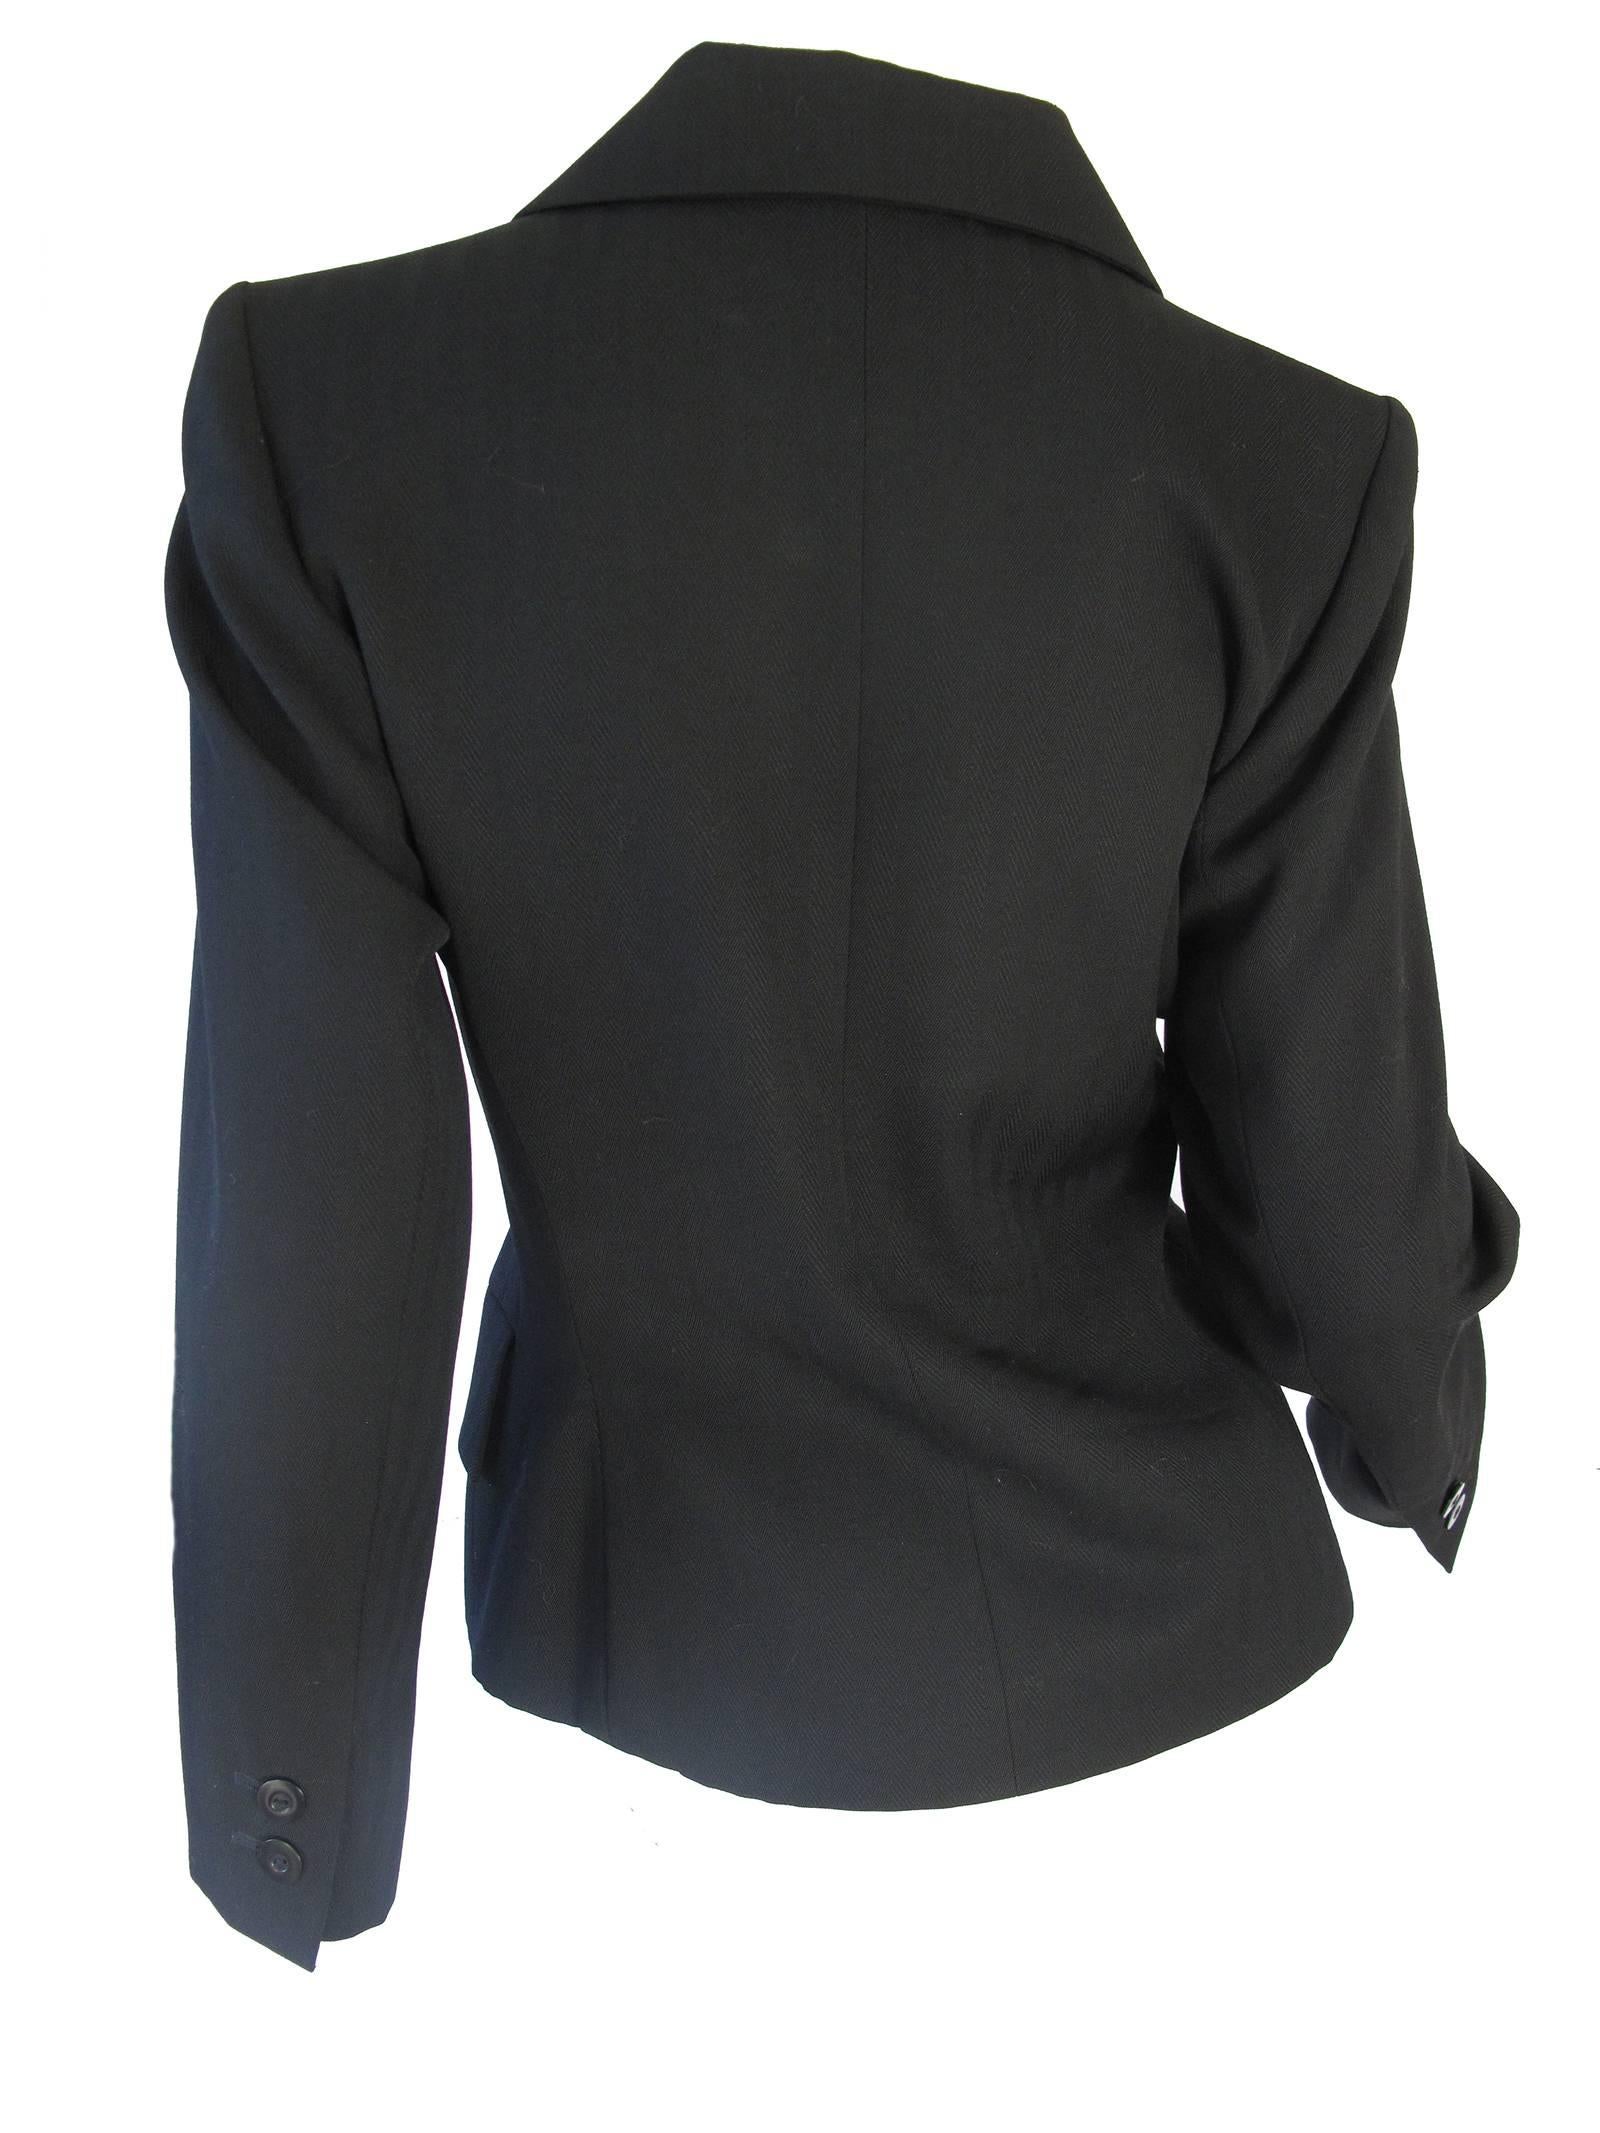 Yves Saint Laurent Rive Gauche black wool gabardine jacket.  Notched collar, buttons down front. Condition: Excellent. Two front pockets, uncut.  Size 38 / US 6

We accept returns for refund, please see our terms. We offer free ground shipping